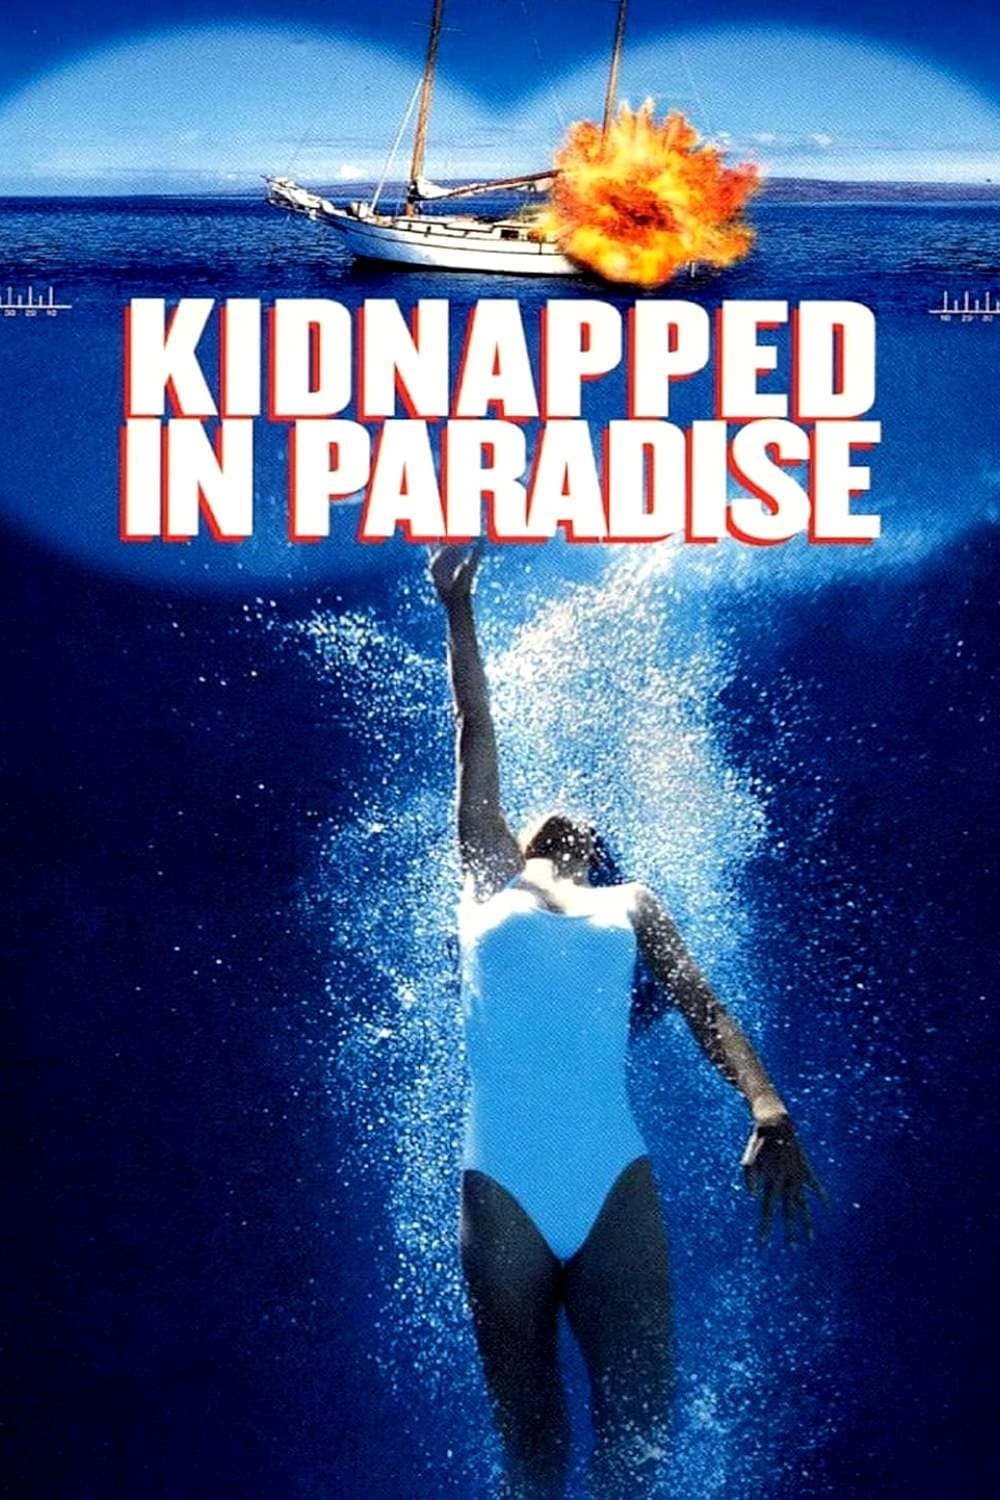 Kidnapped in Paradise